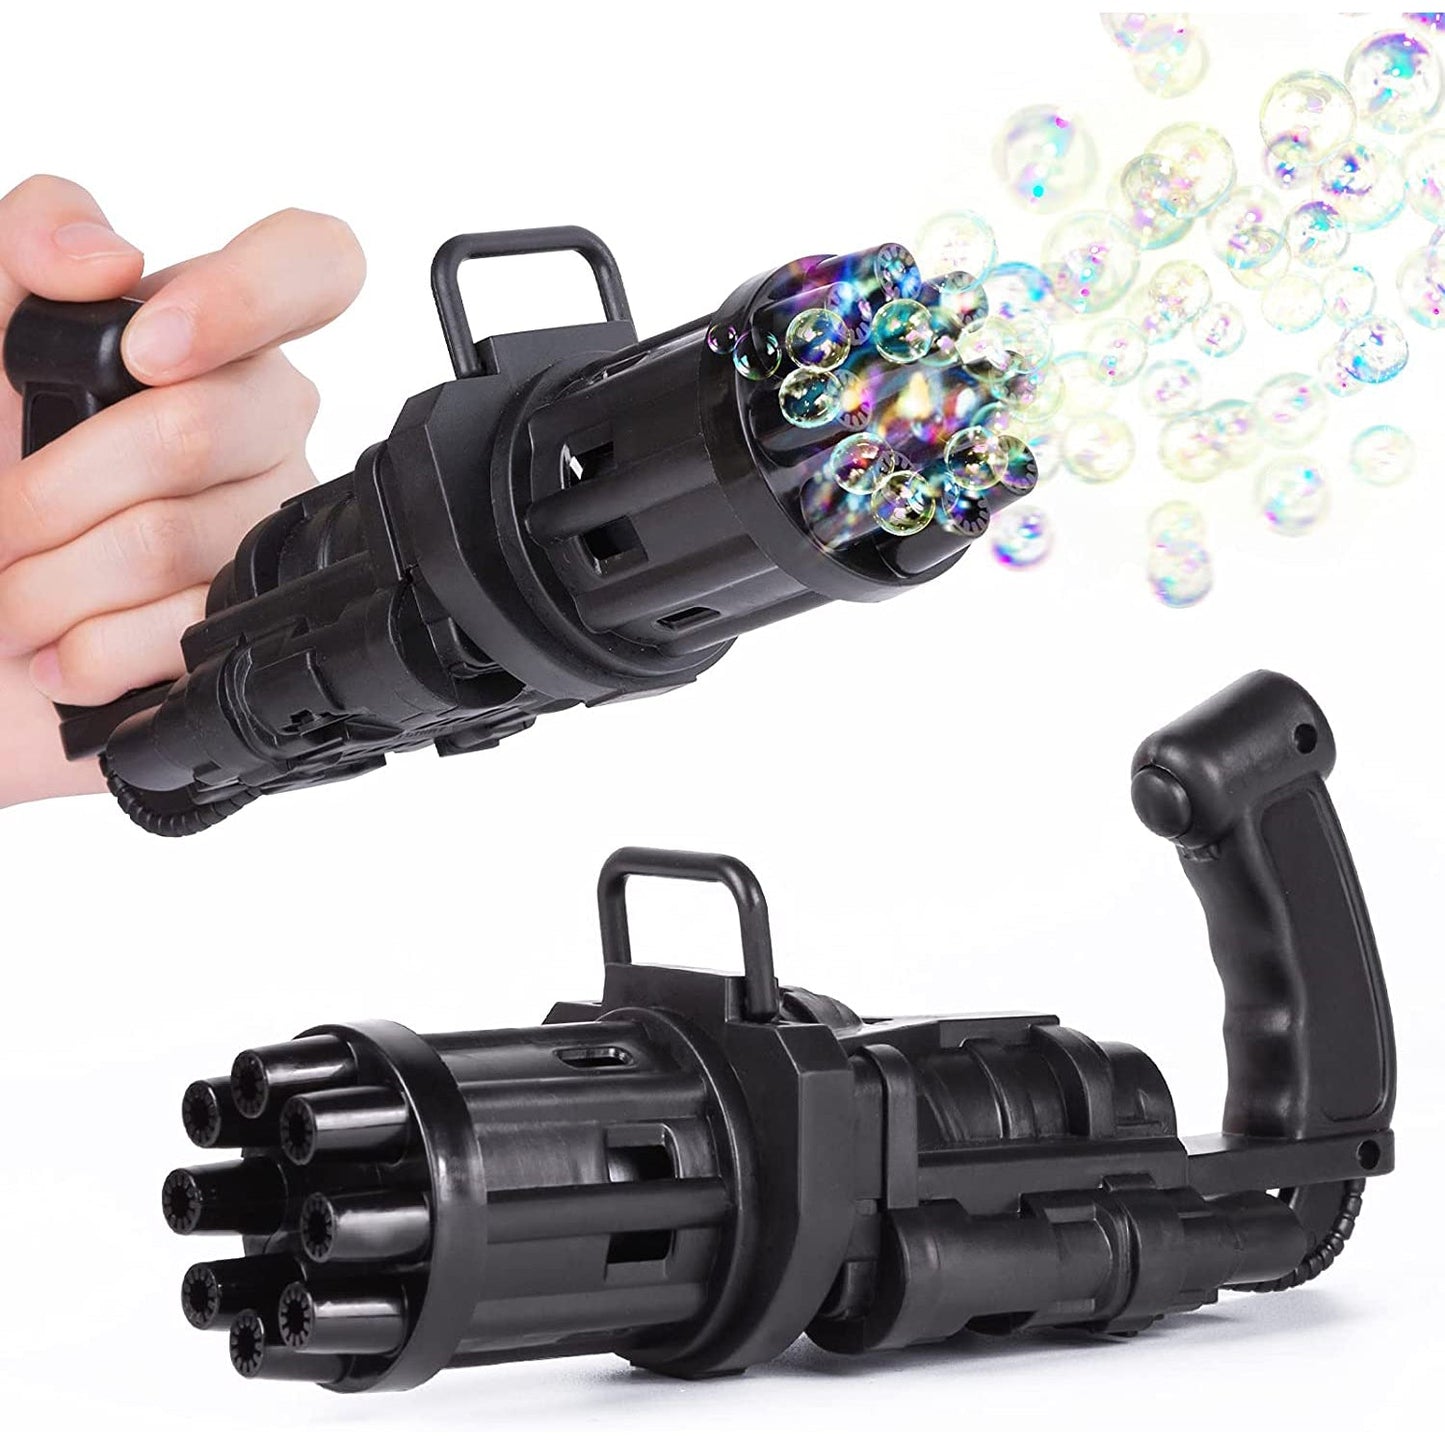 8028 8-Hole battery operated Bubbles Gun Toys for Boys and Girls